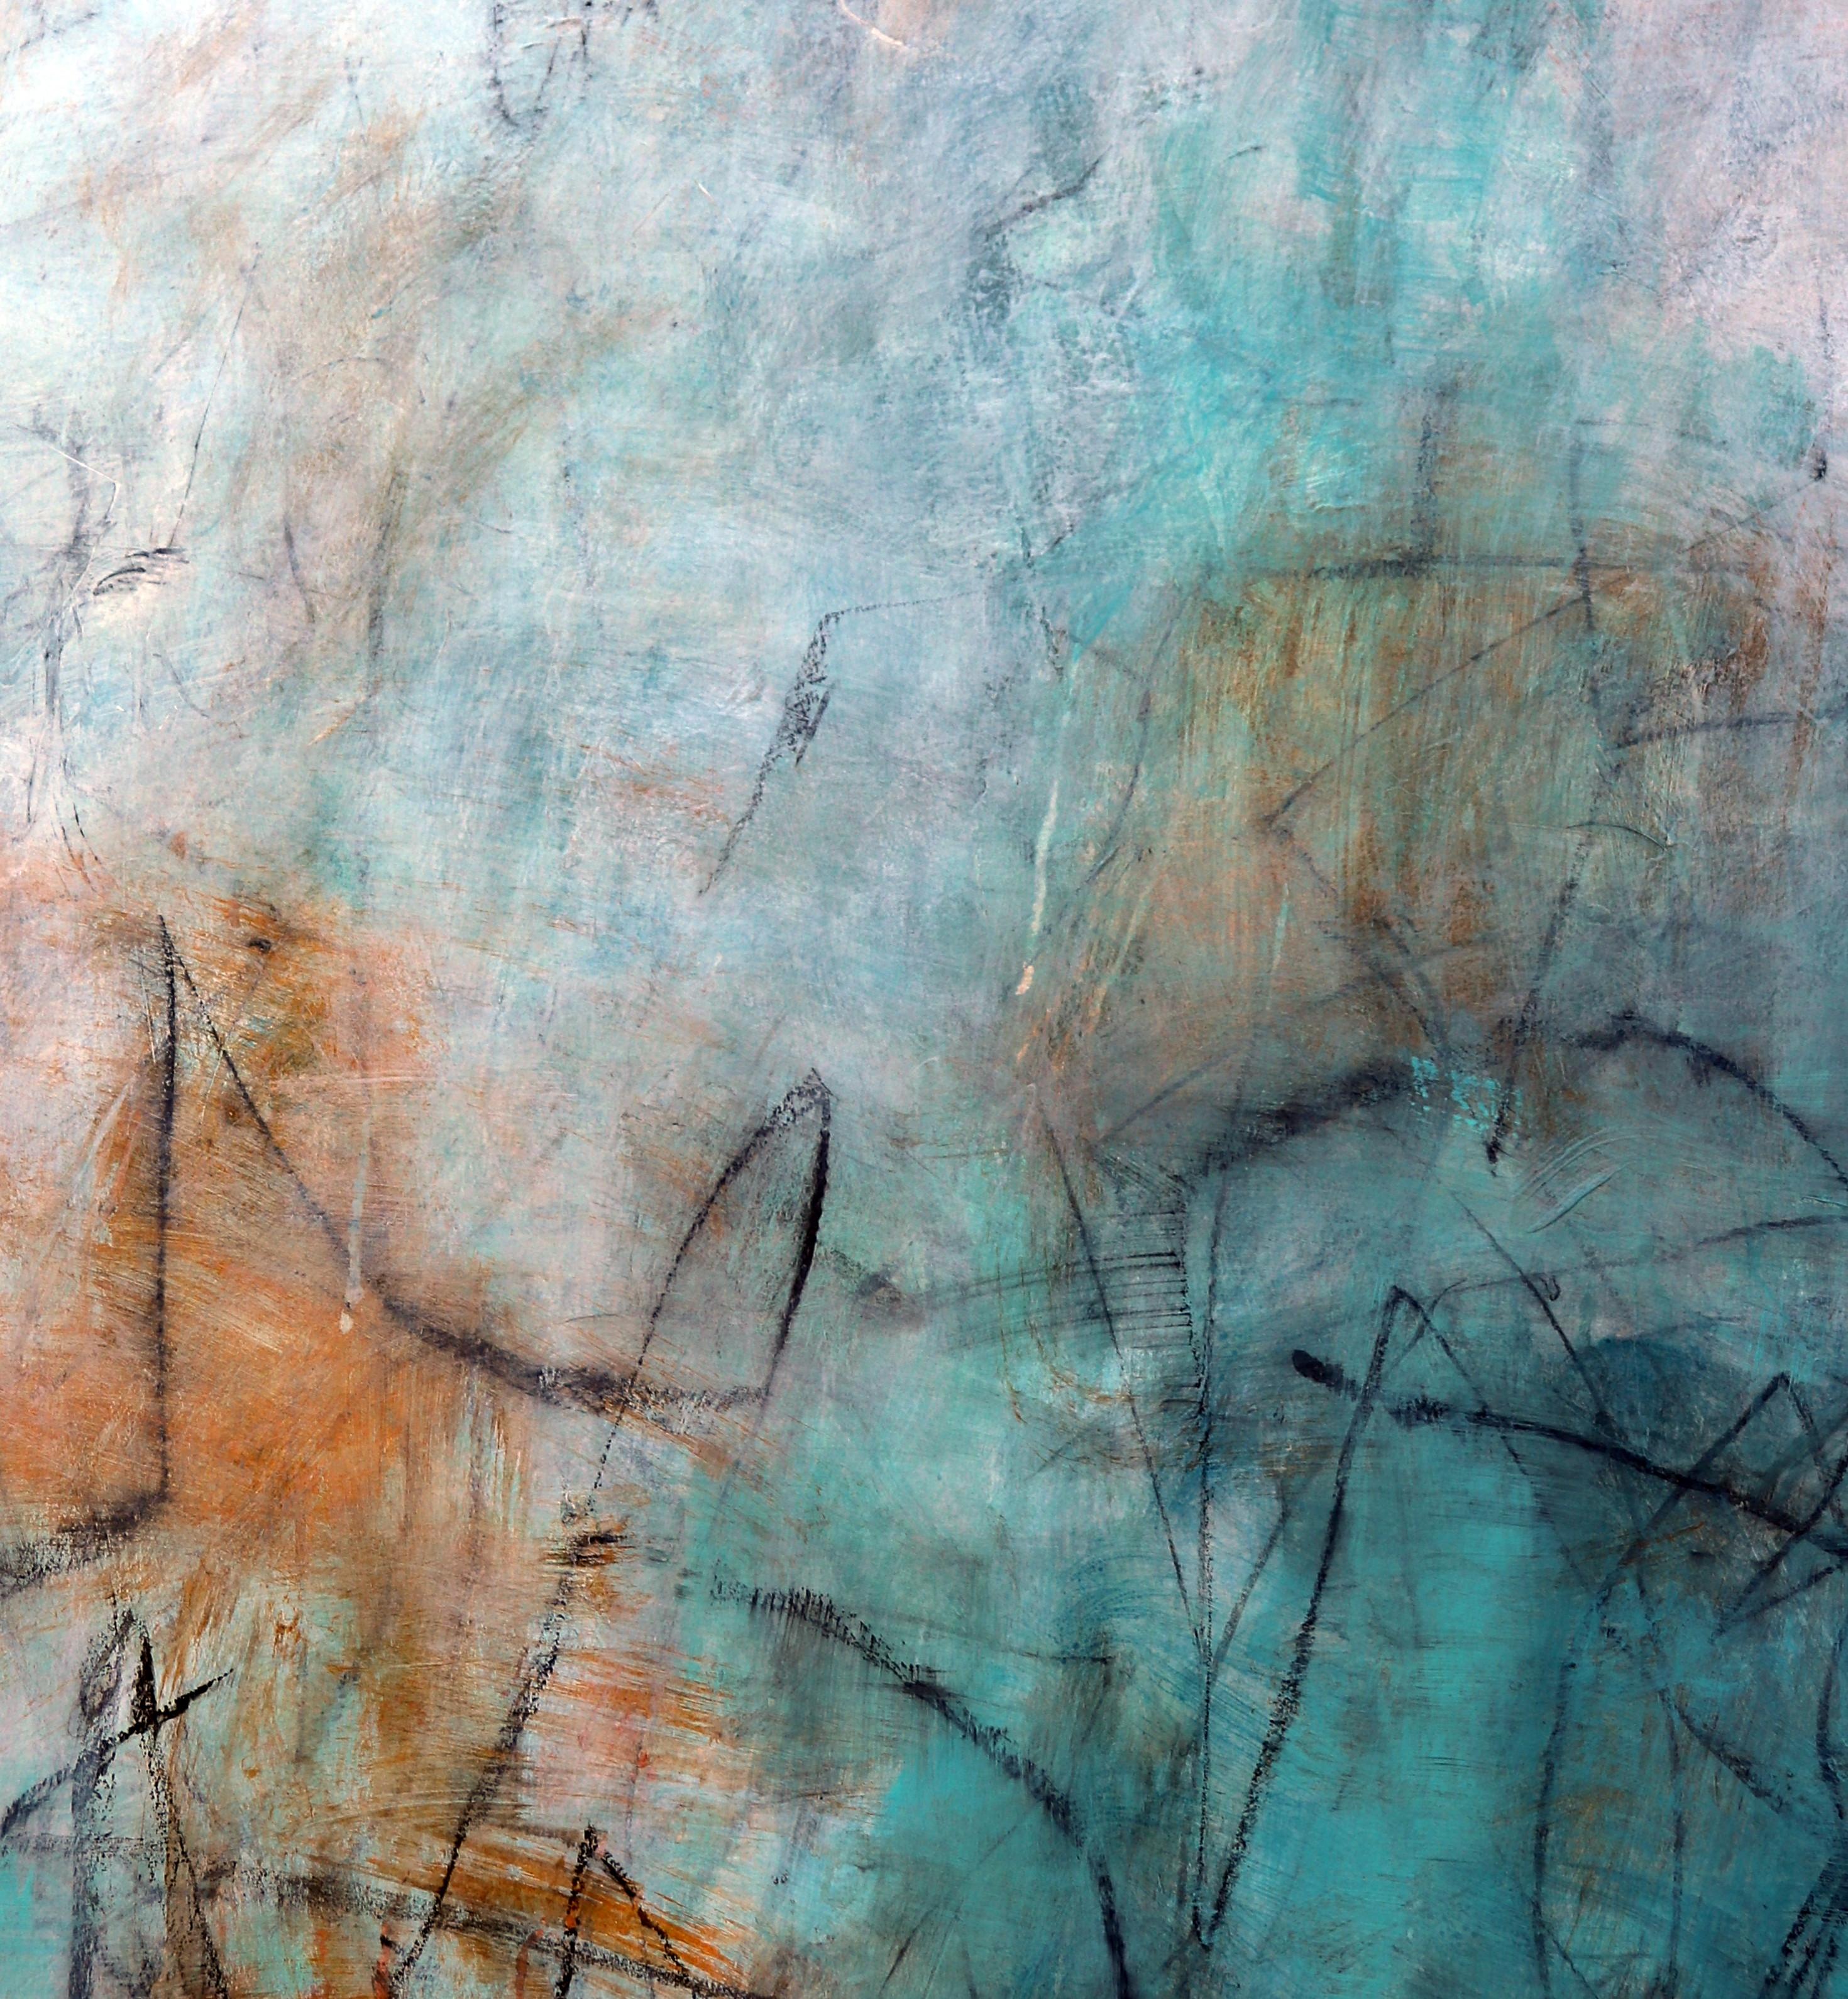 Depth of Field , mixed media on paper
Comes UNFRAMED

This large abstract painting combines an interplay of cool soothing color with perfect composition and balance.

About the Artist: Julie Schumer, a native of Los Angeles, California, and born in